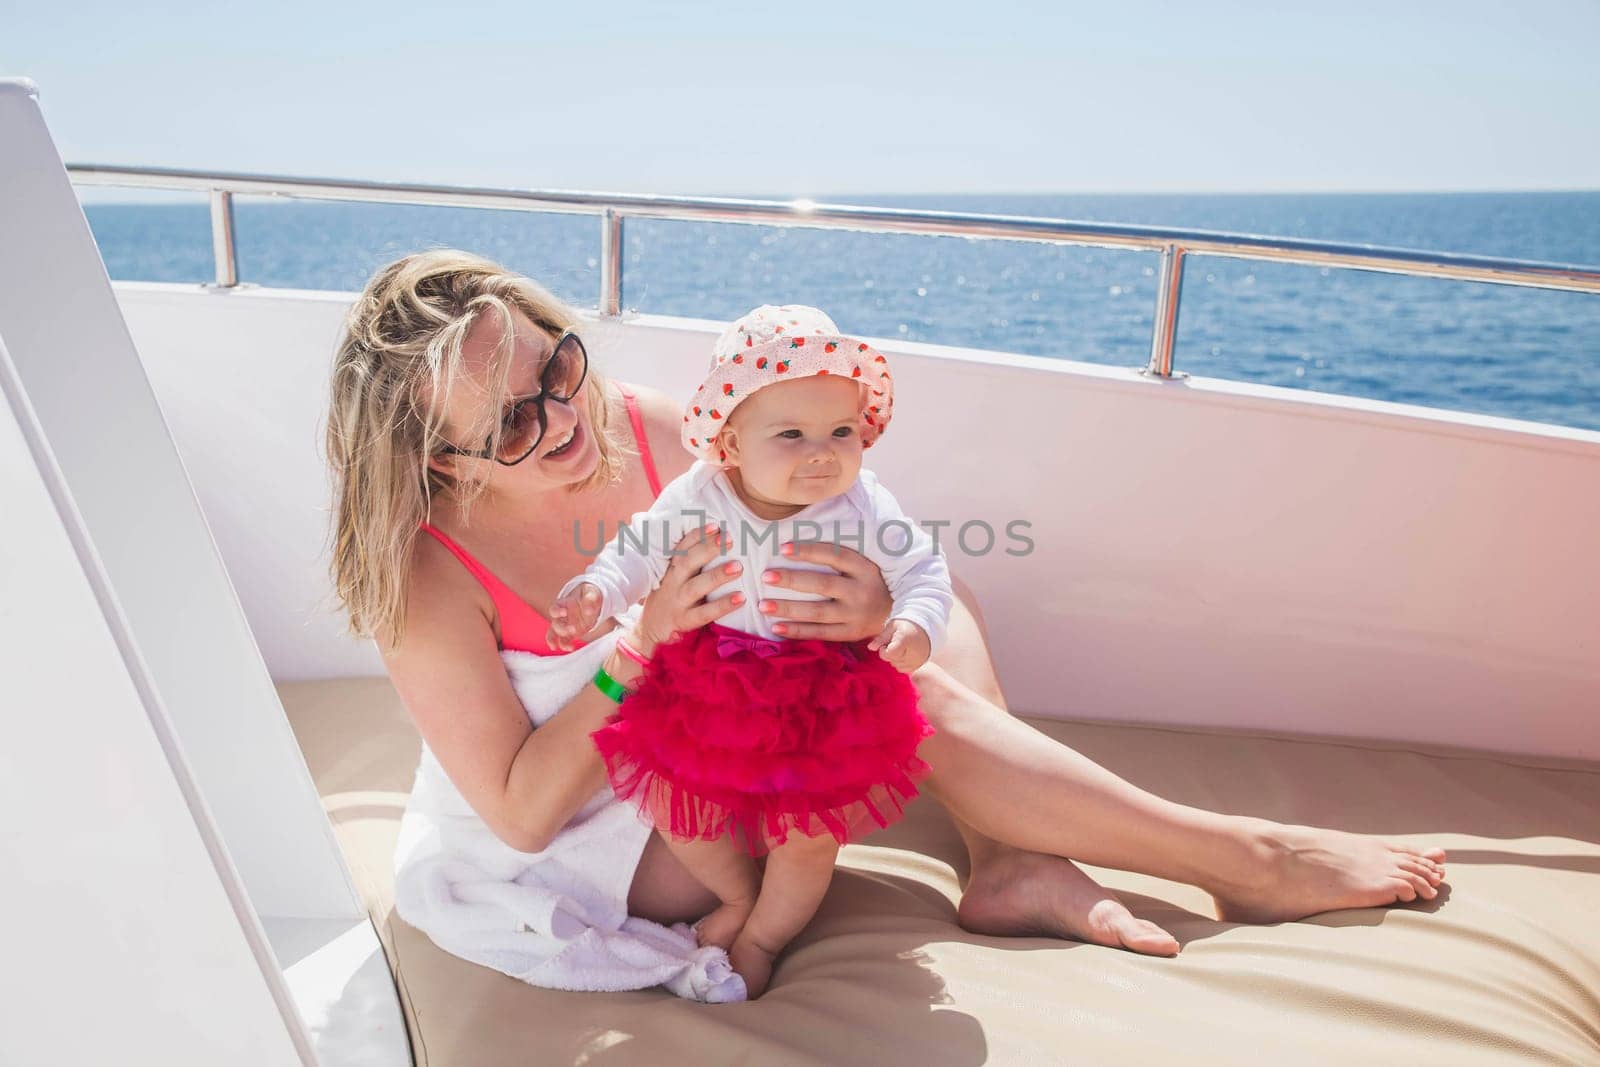 mom with newborn daughter sunbathe on a yacht in the sea.